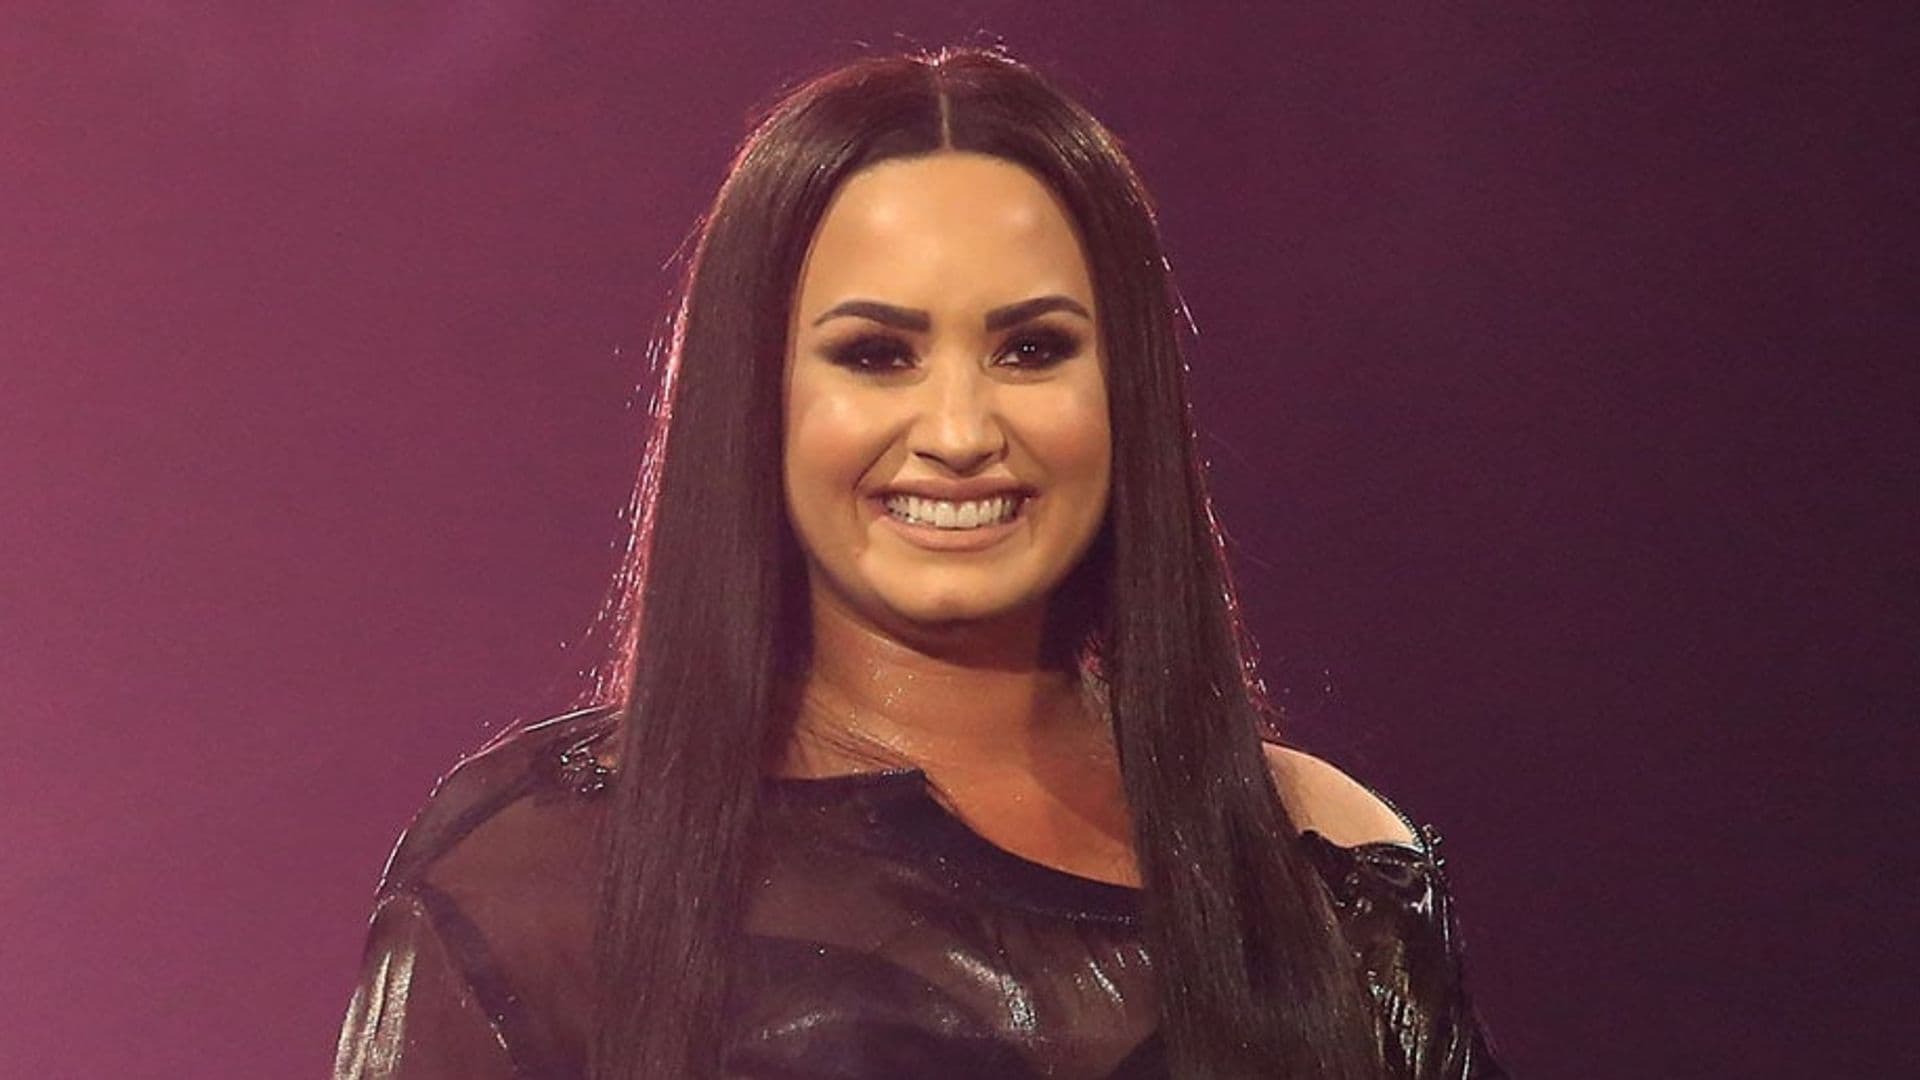 Demi Lovato Performs at The O2 Arena